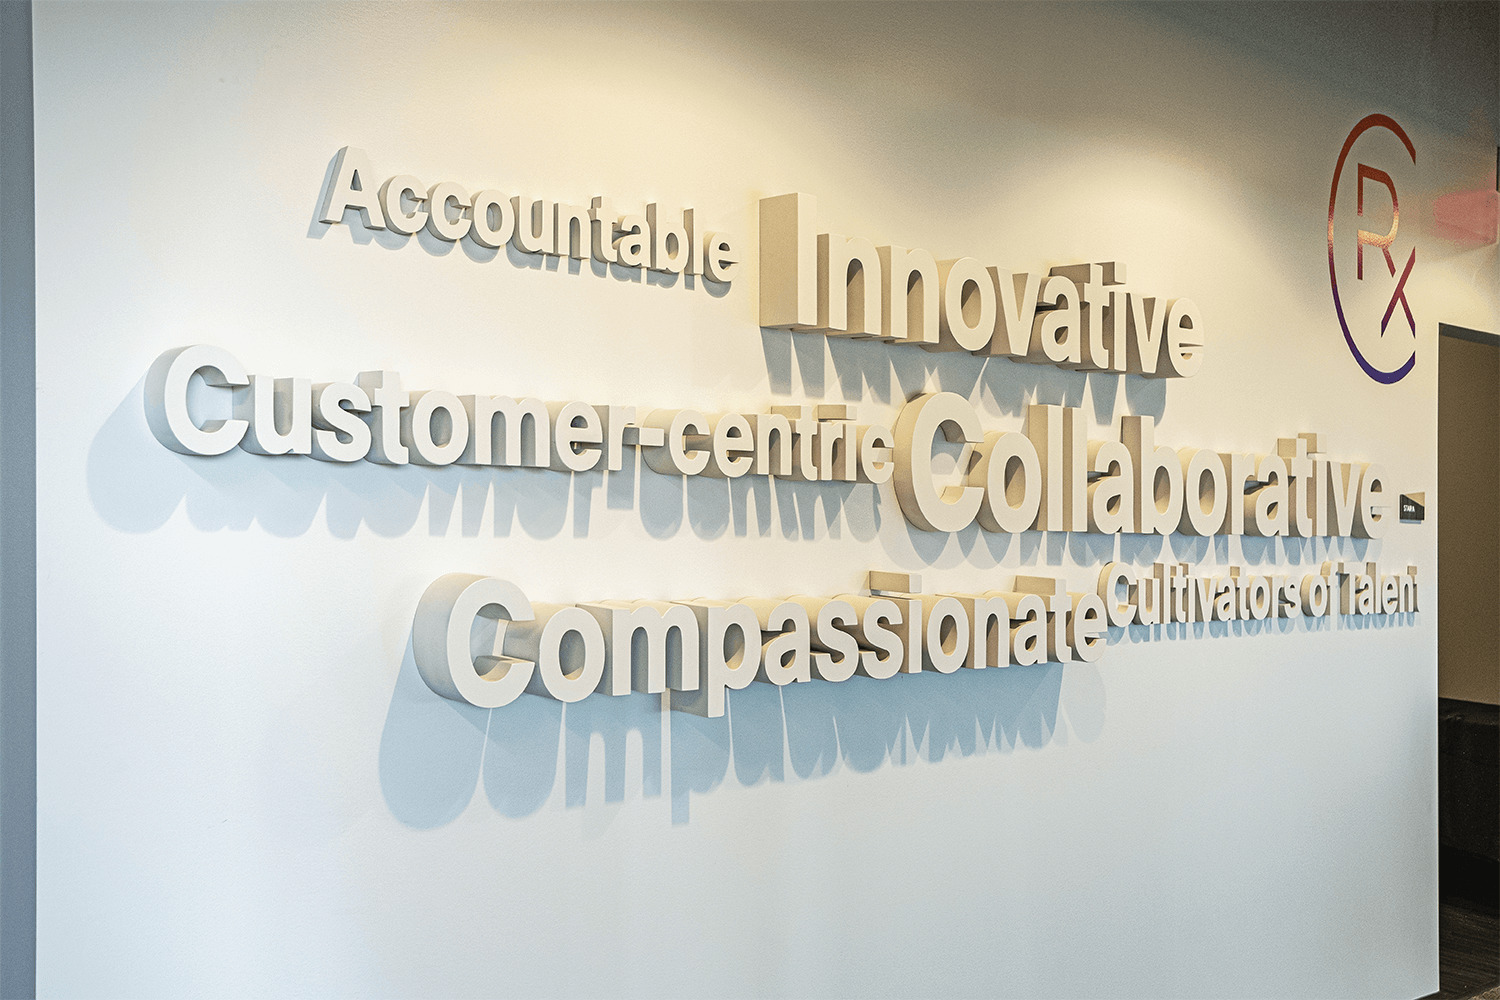 3D decorative word cloud built on a wall, reads: Accountable, Innovative, Customer-centric, Collaborative, Compassionate, Cultivators of Talent